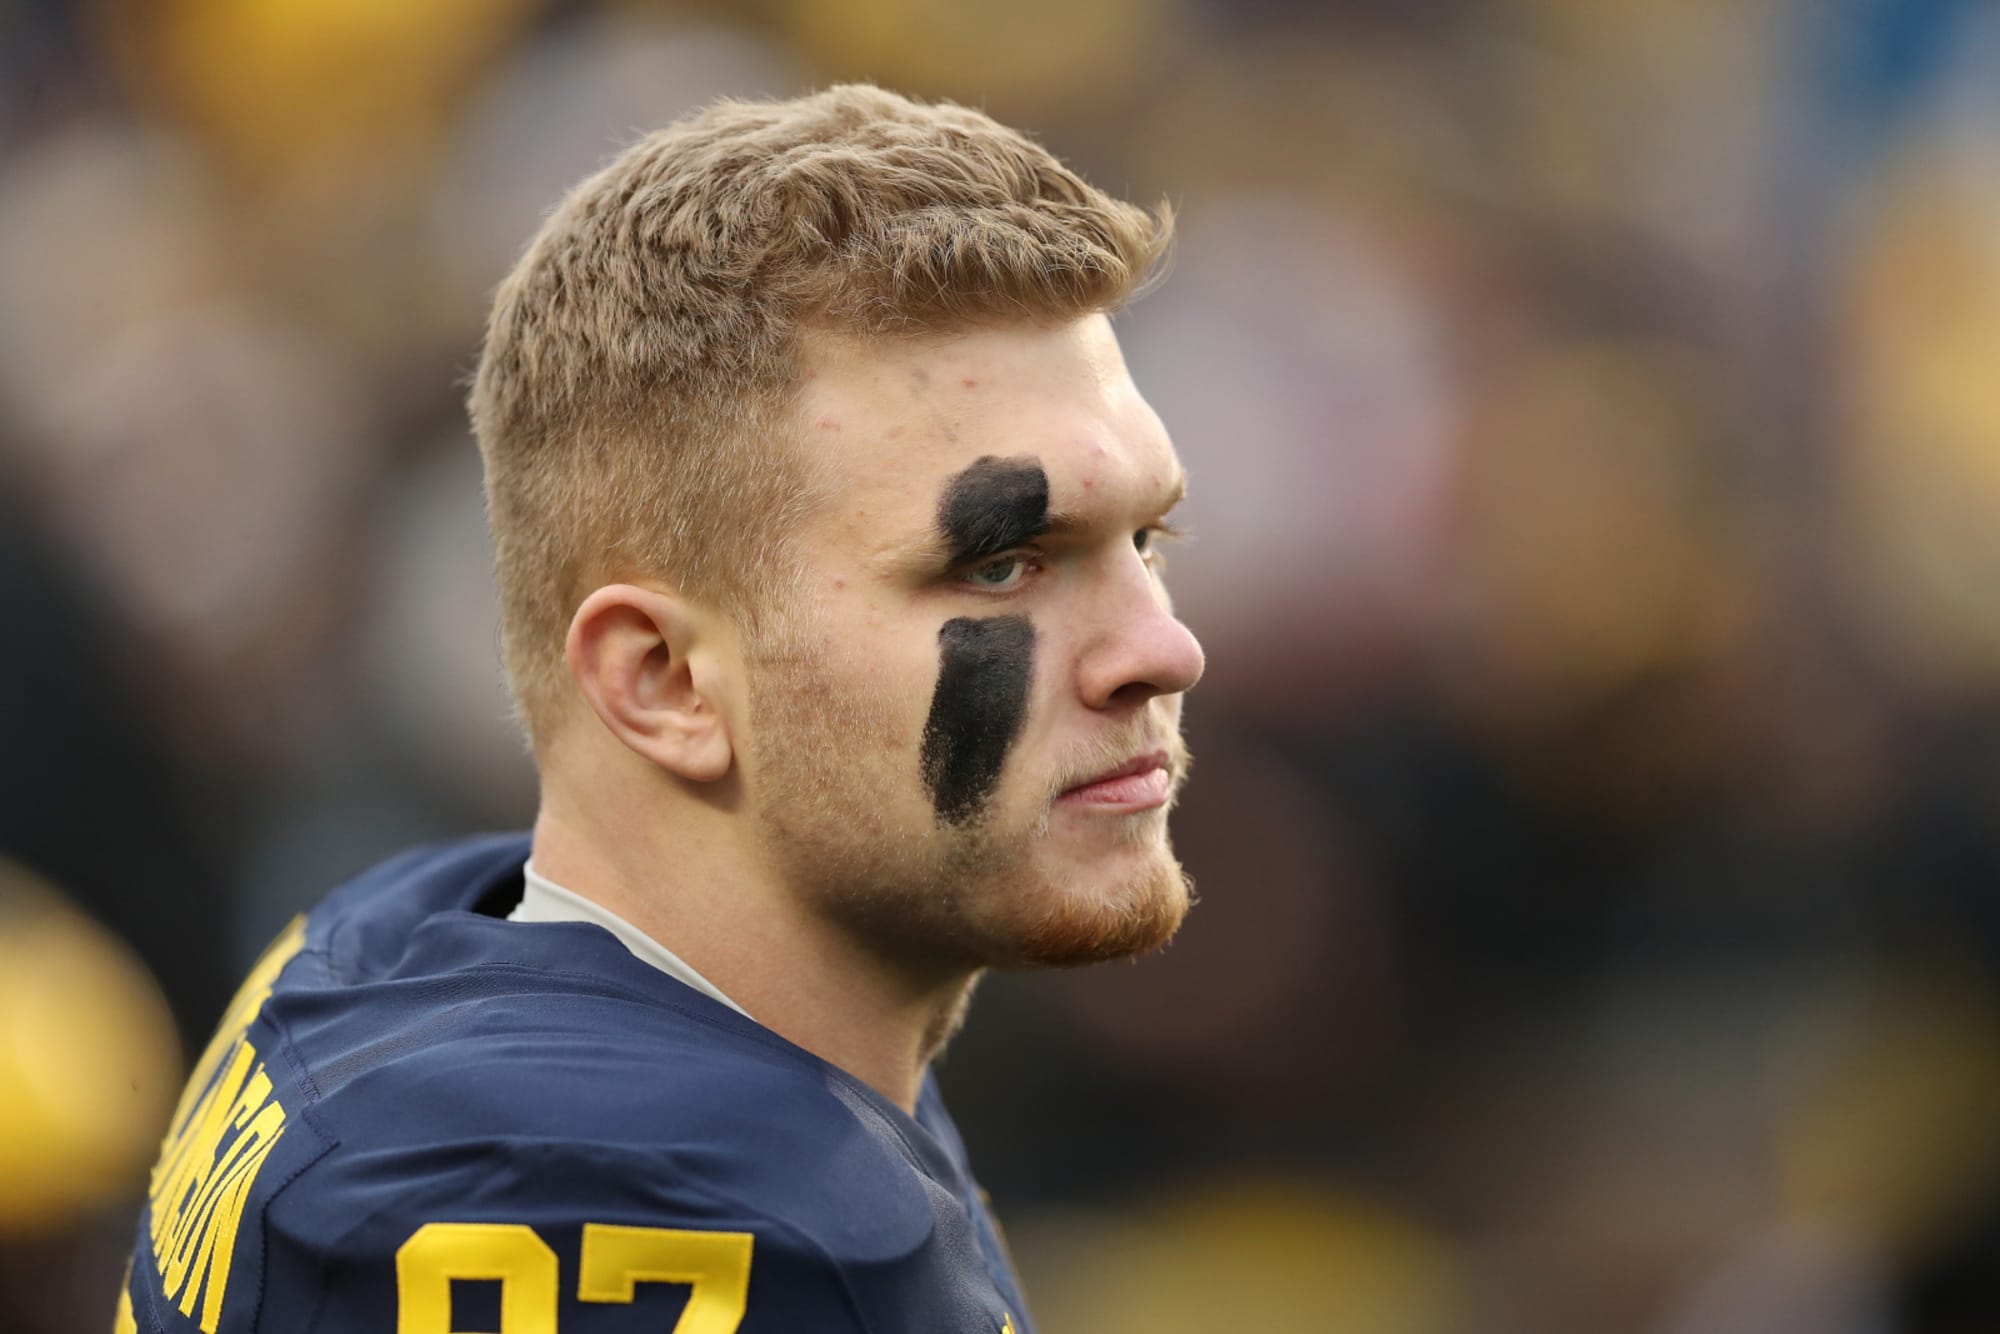 The message is out on eye black in college football and the NFL